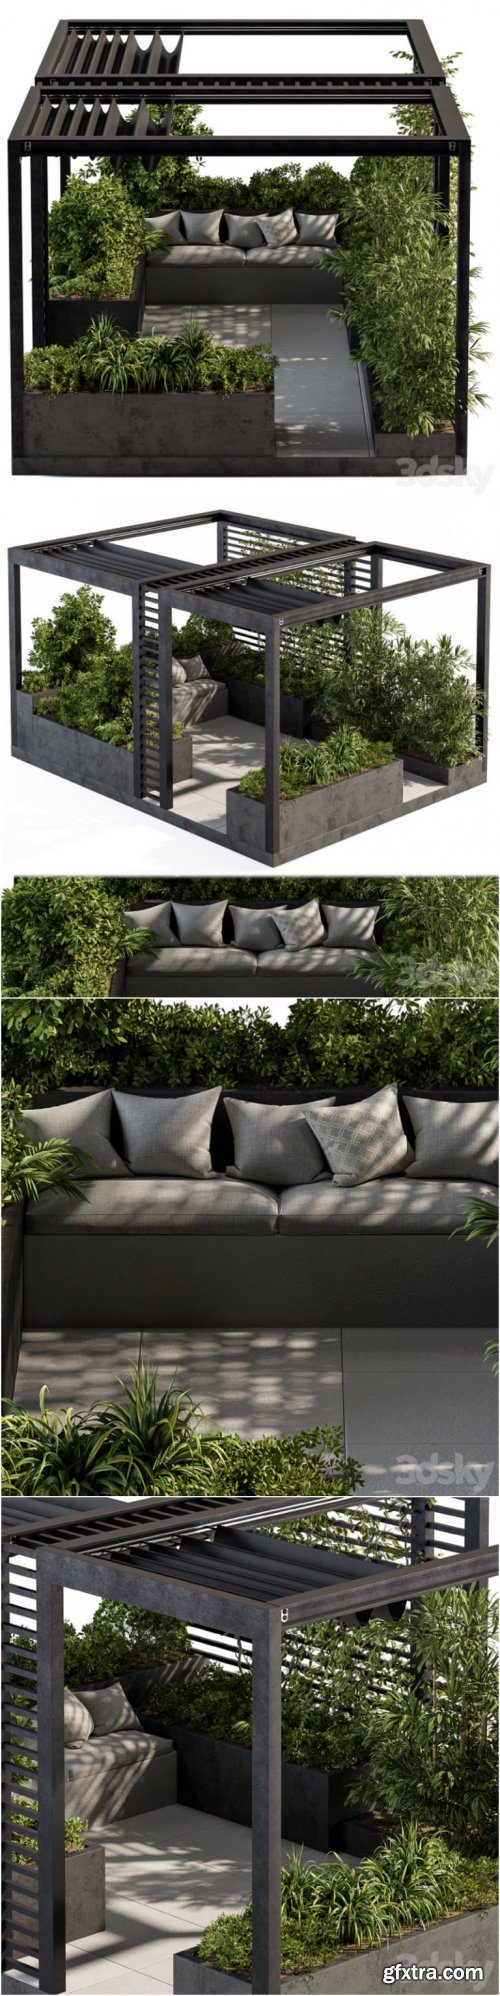 Roof Garden and Landscape Furniture with Pergola – Set 38